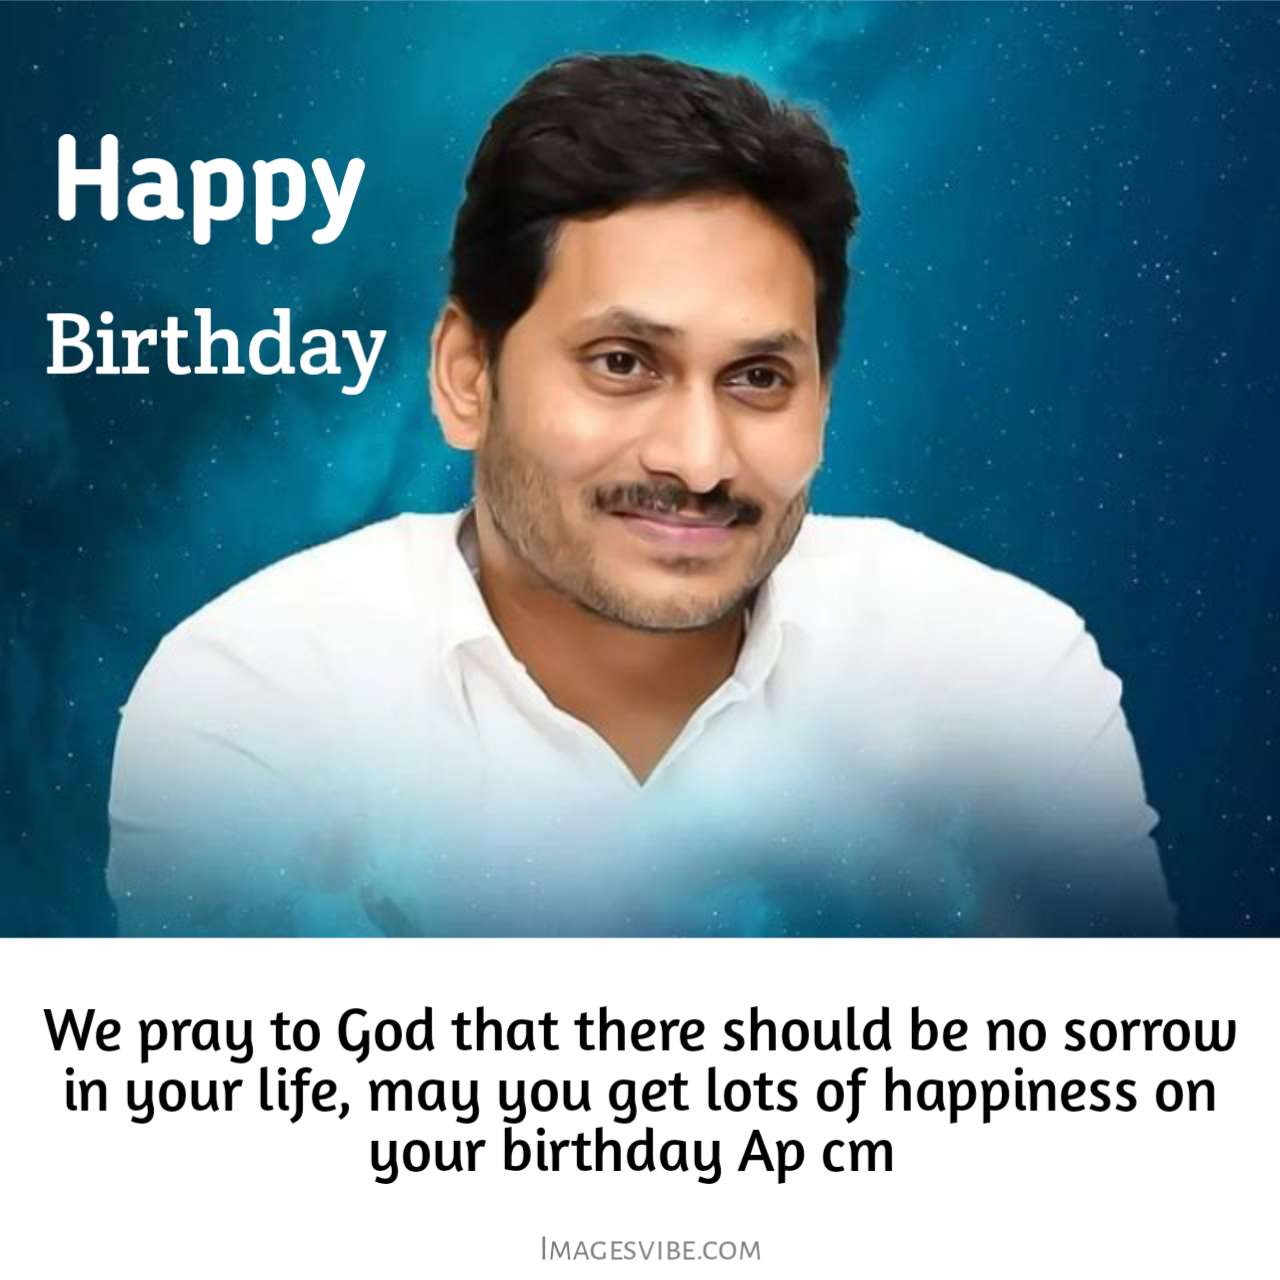 Happy Birthday Jagan Images & Wishes - Images Vibe